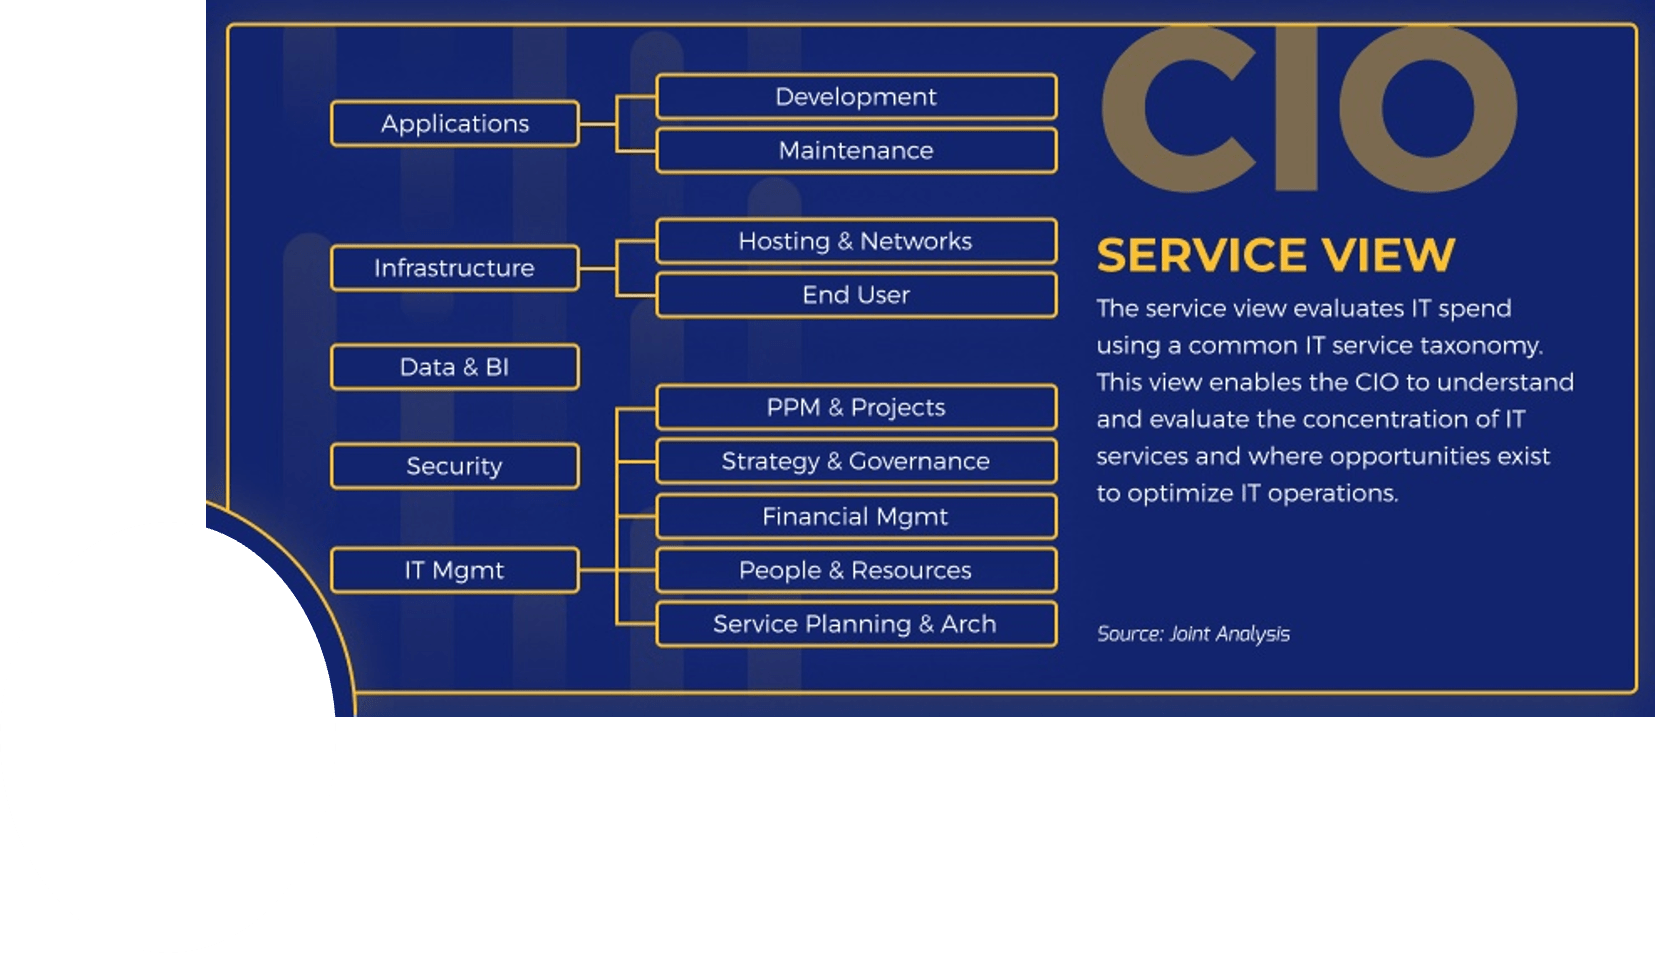 The image contains a screenshot of the CIO service view.